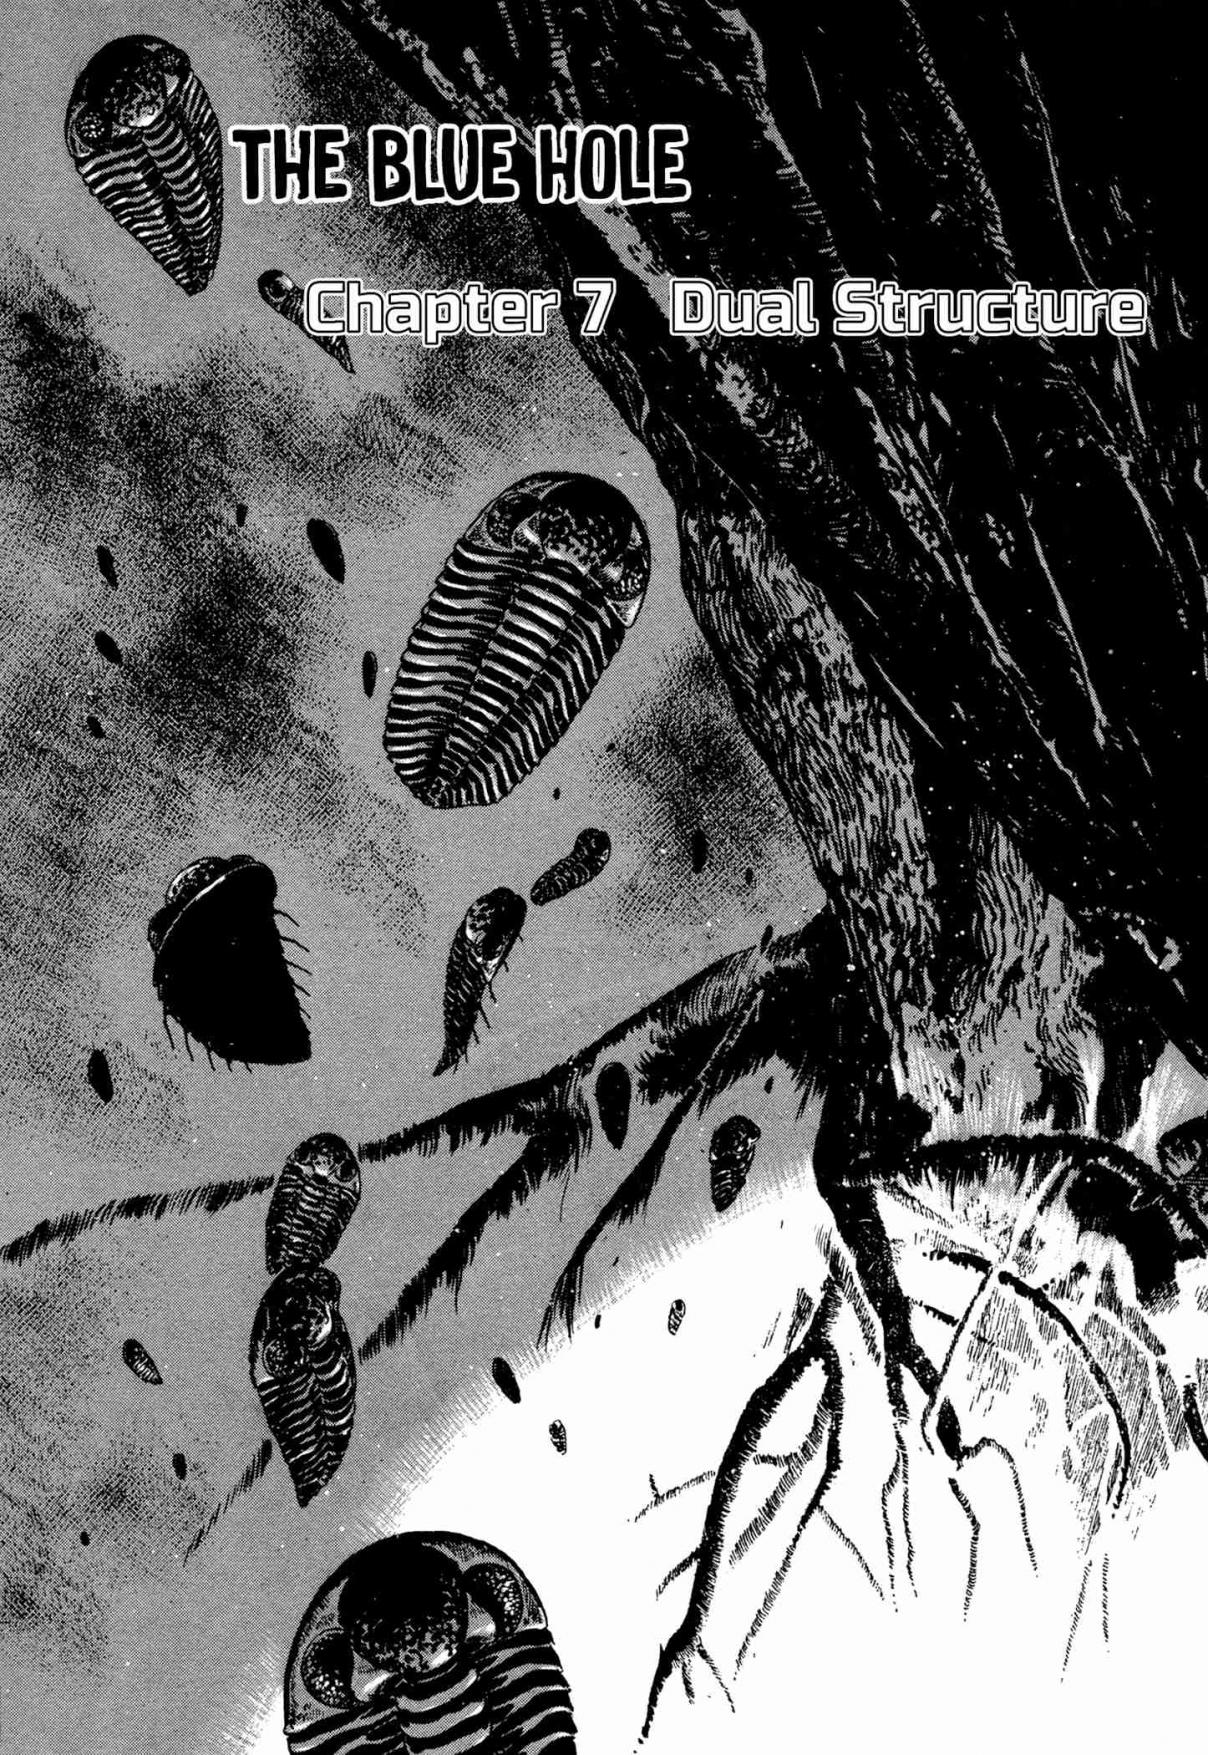 The Blue Hole Vol. 1 Ch. 7 Dual Structure